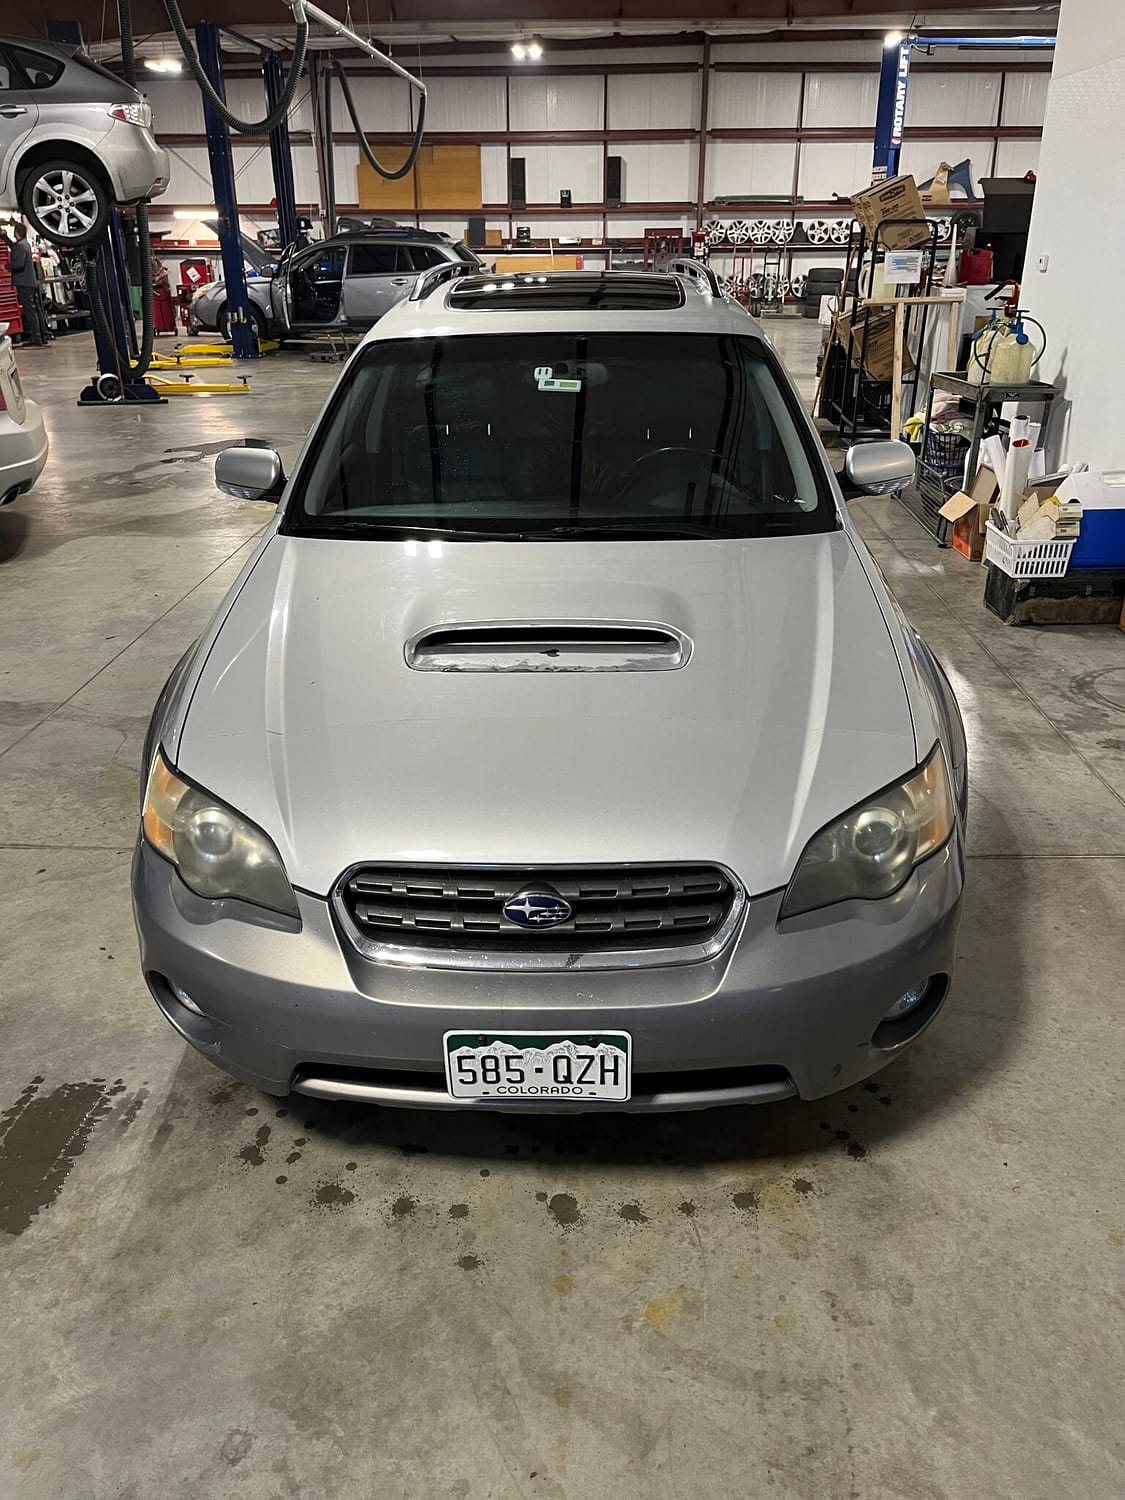 Come test drive the Best Turbo, Subaru had ever made (in my opinion). the 2005 Subaru Outback XT